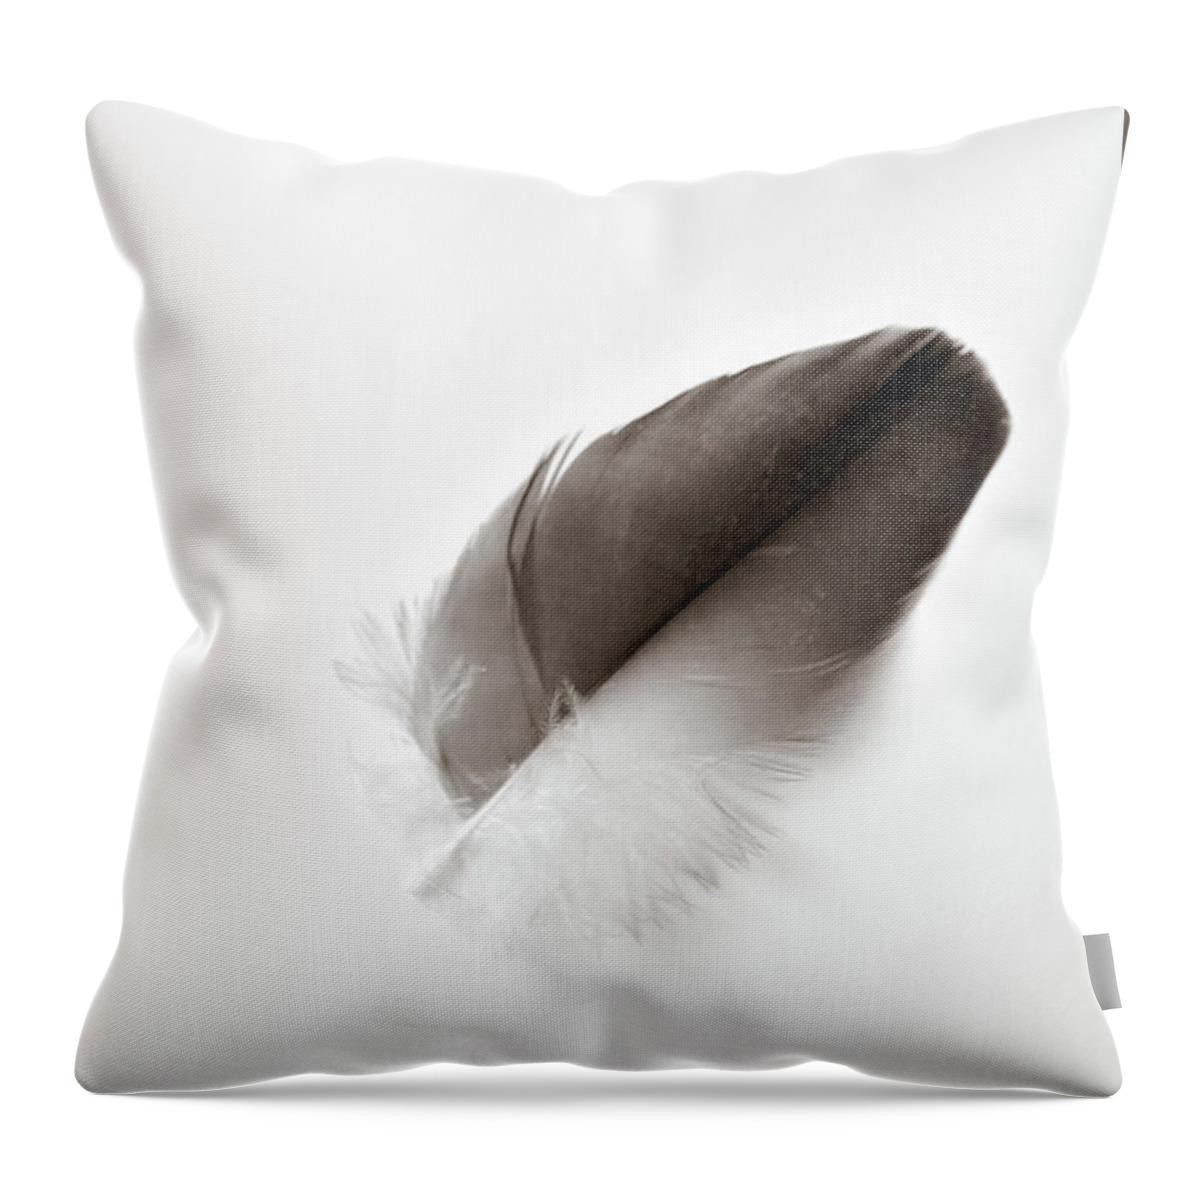 Feather Throw Pillow featuring the photograph Flightless by Michelle Wermuth